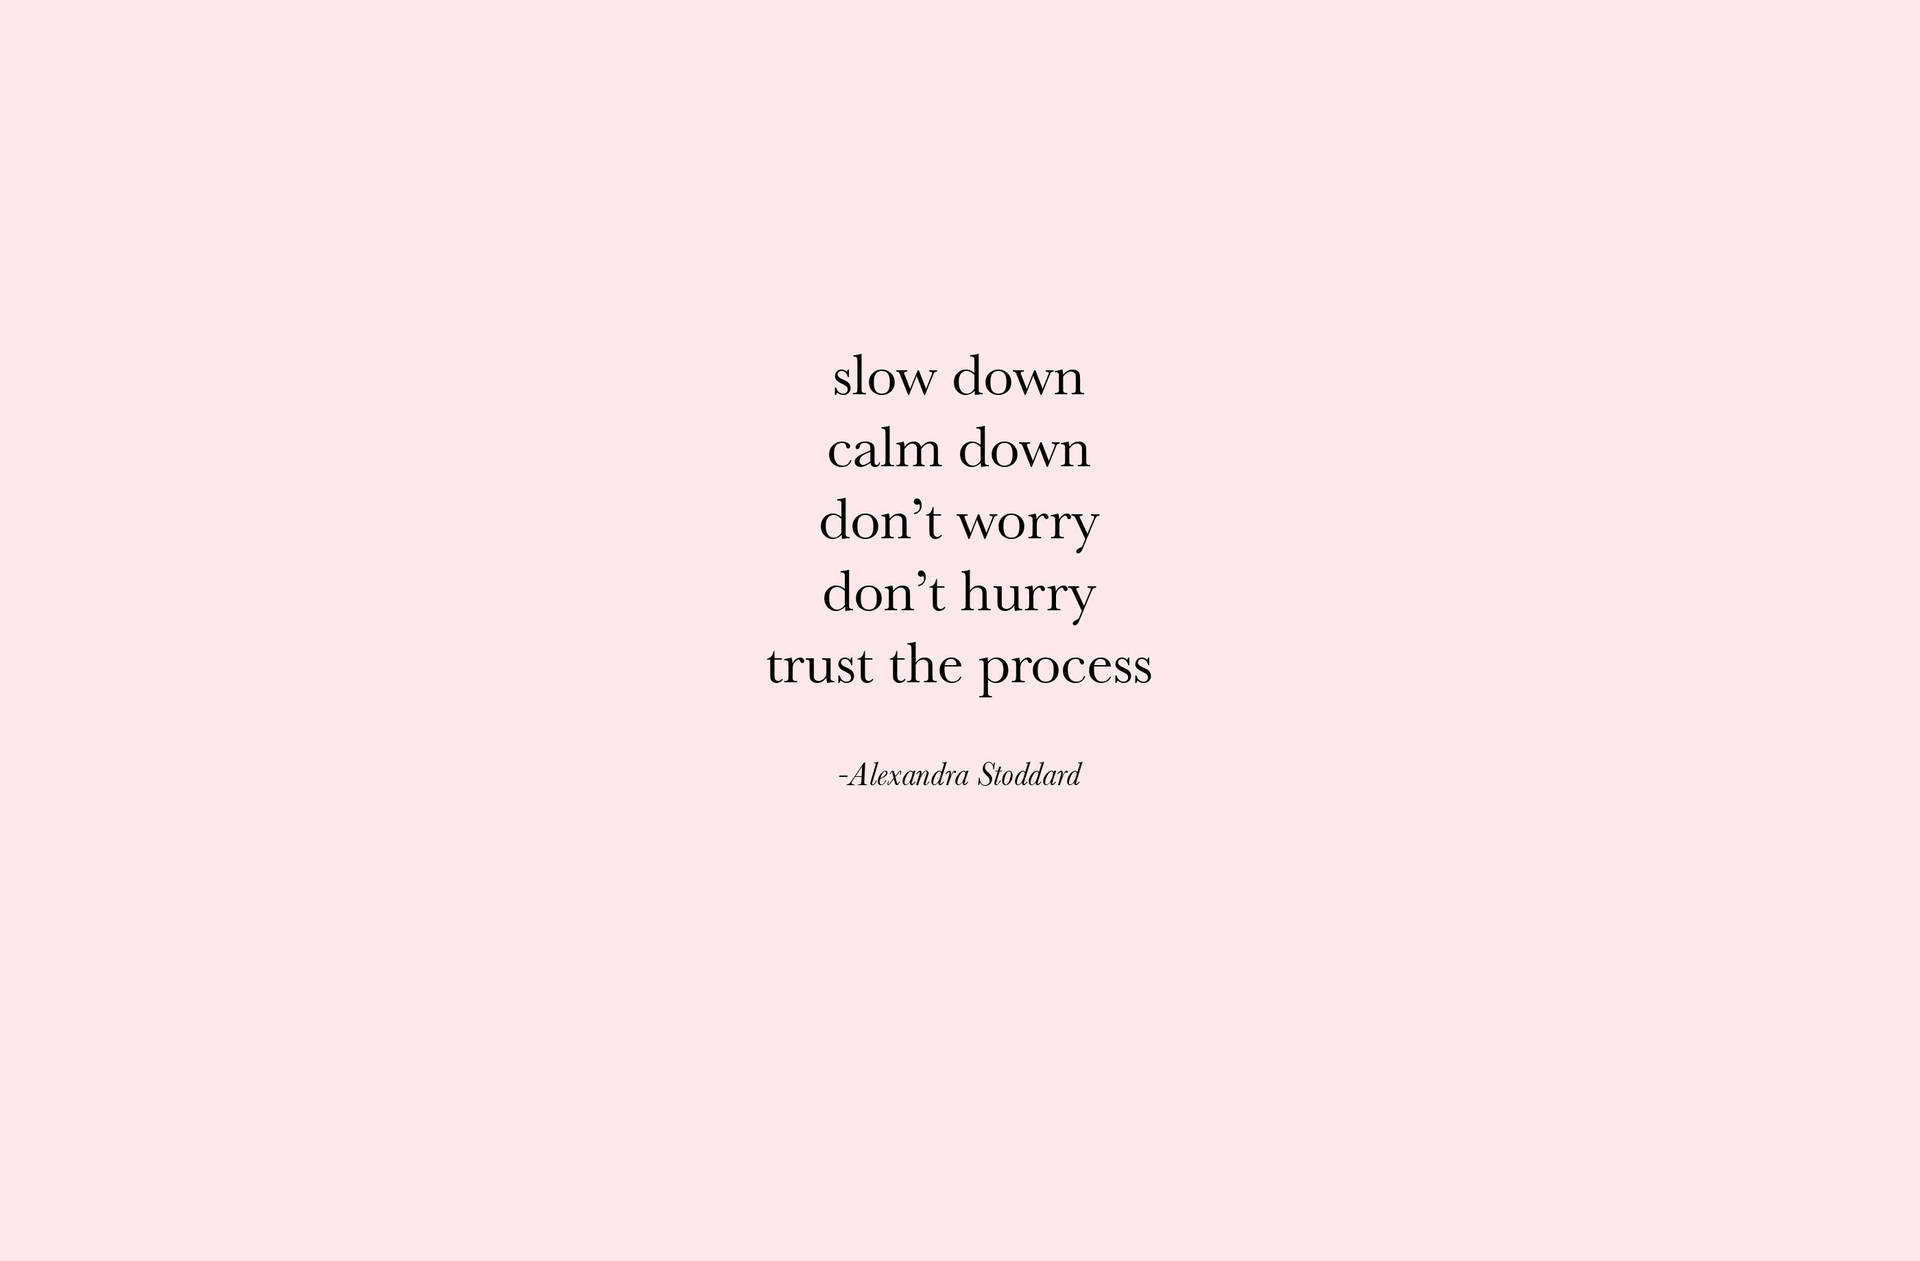 Download Aesthetic Quotes Slow Down Calm Down Wallpaper | Wallpapers.com